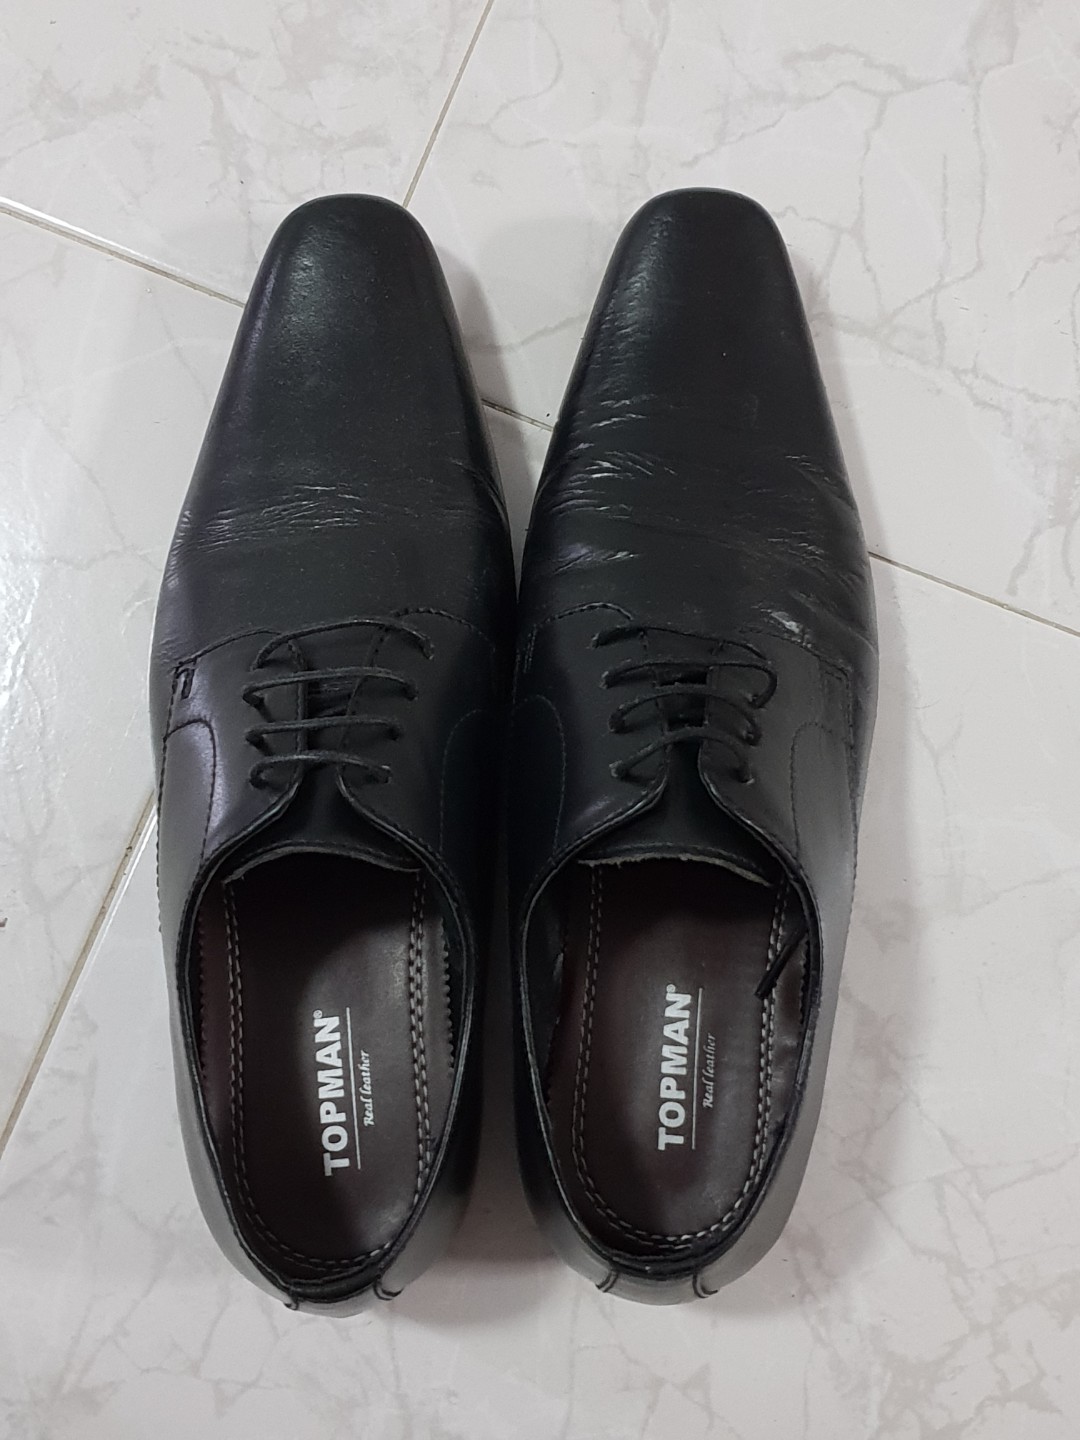 topman leather shoes